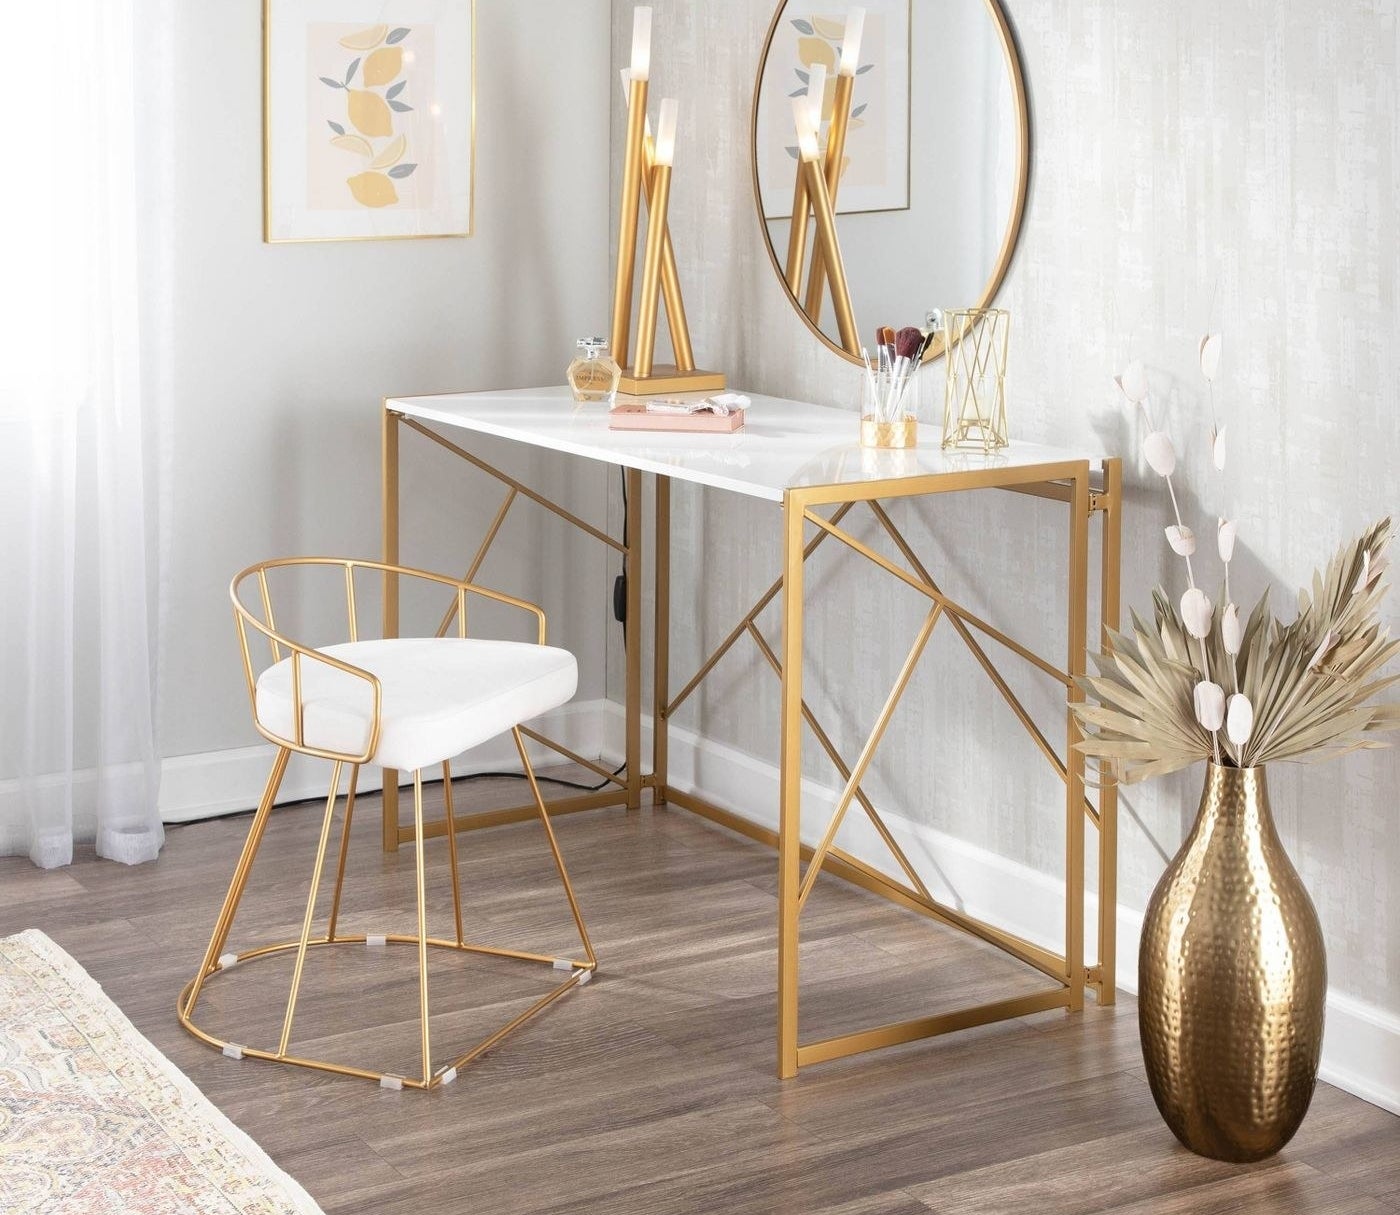 The desk has a white top and a gold geometrical backing and legs  